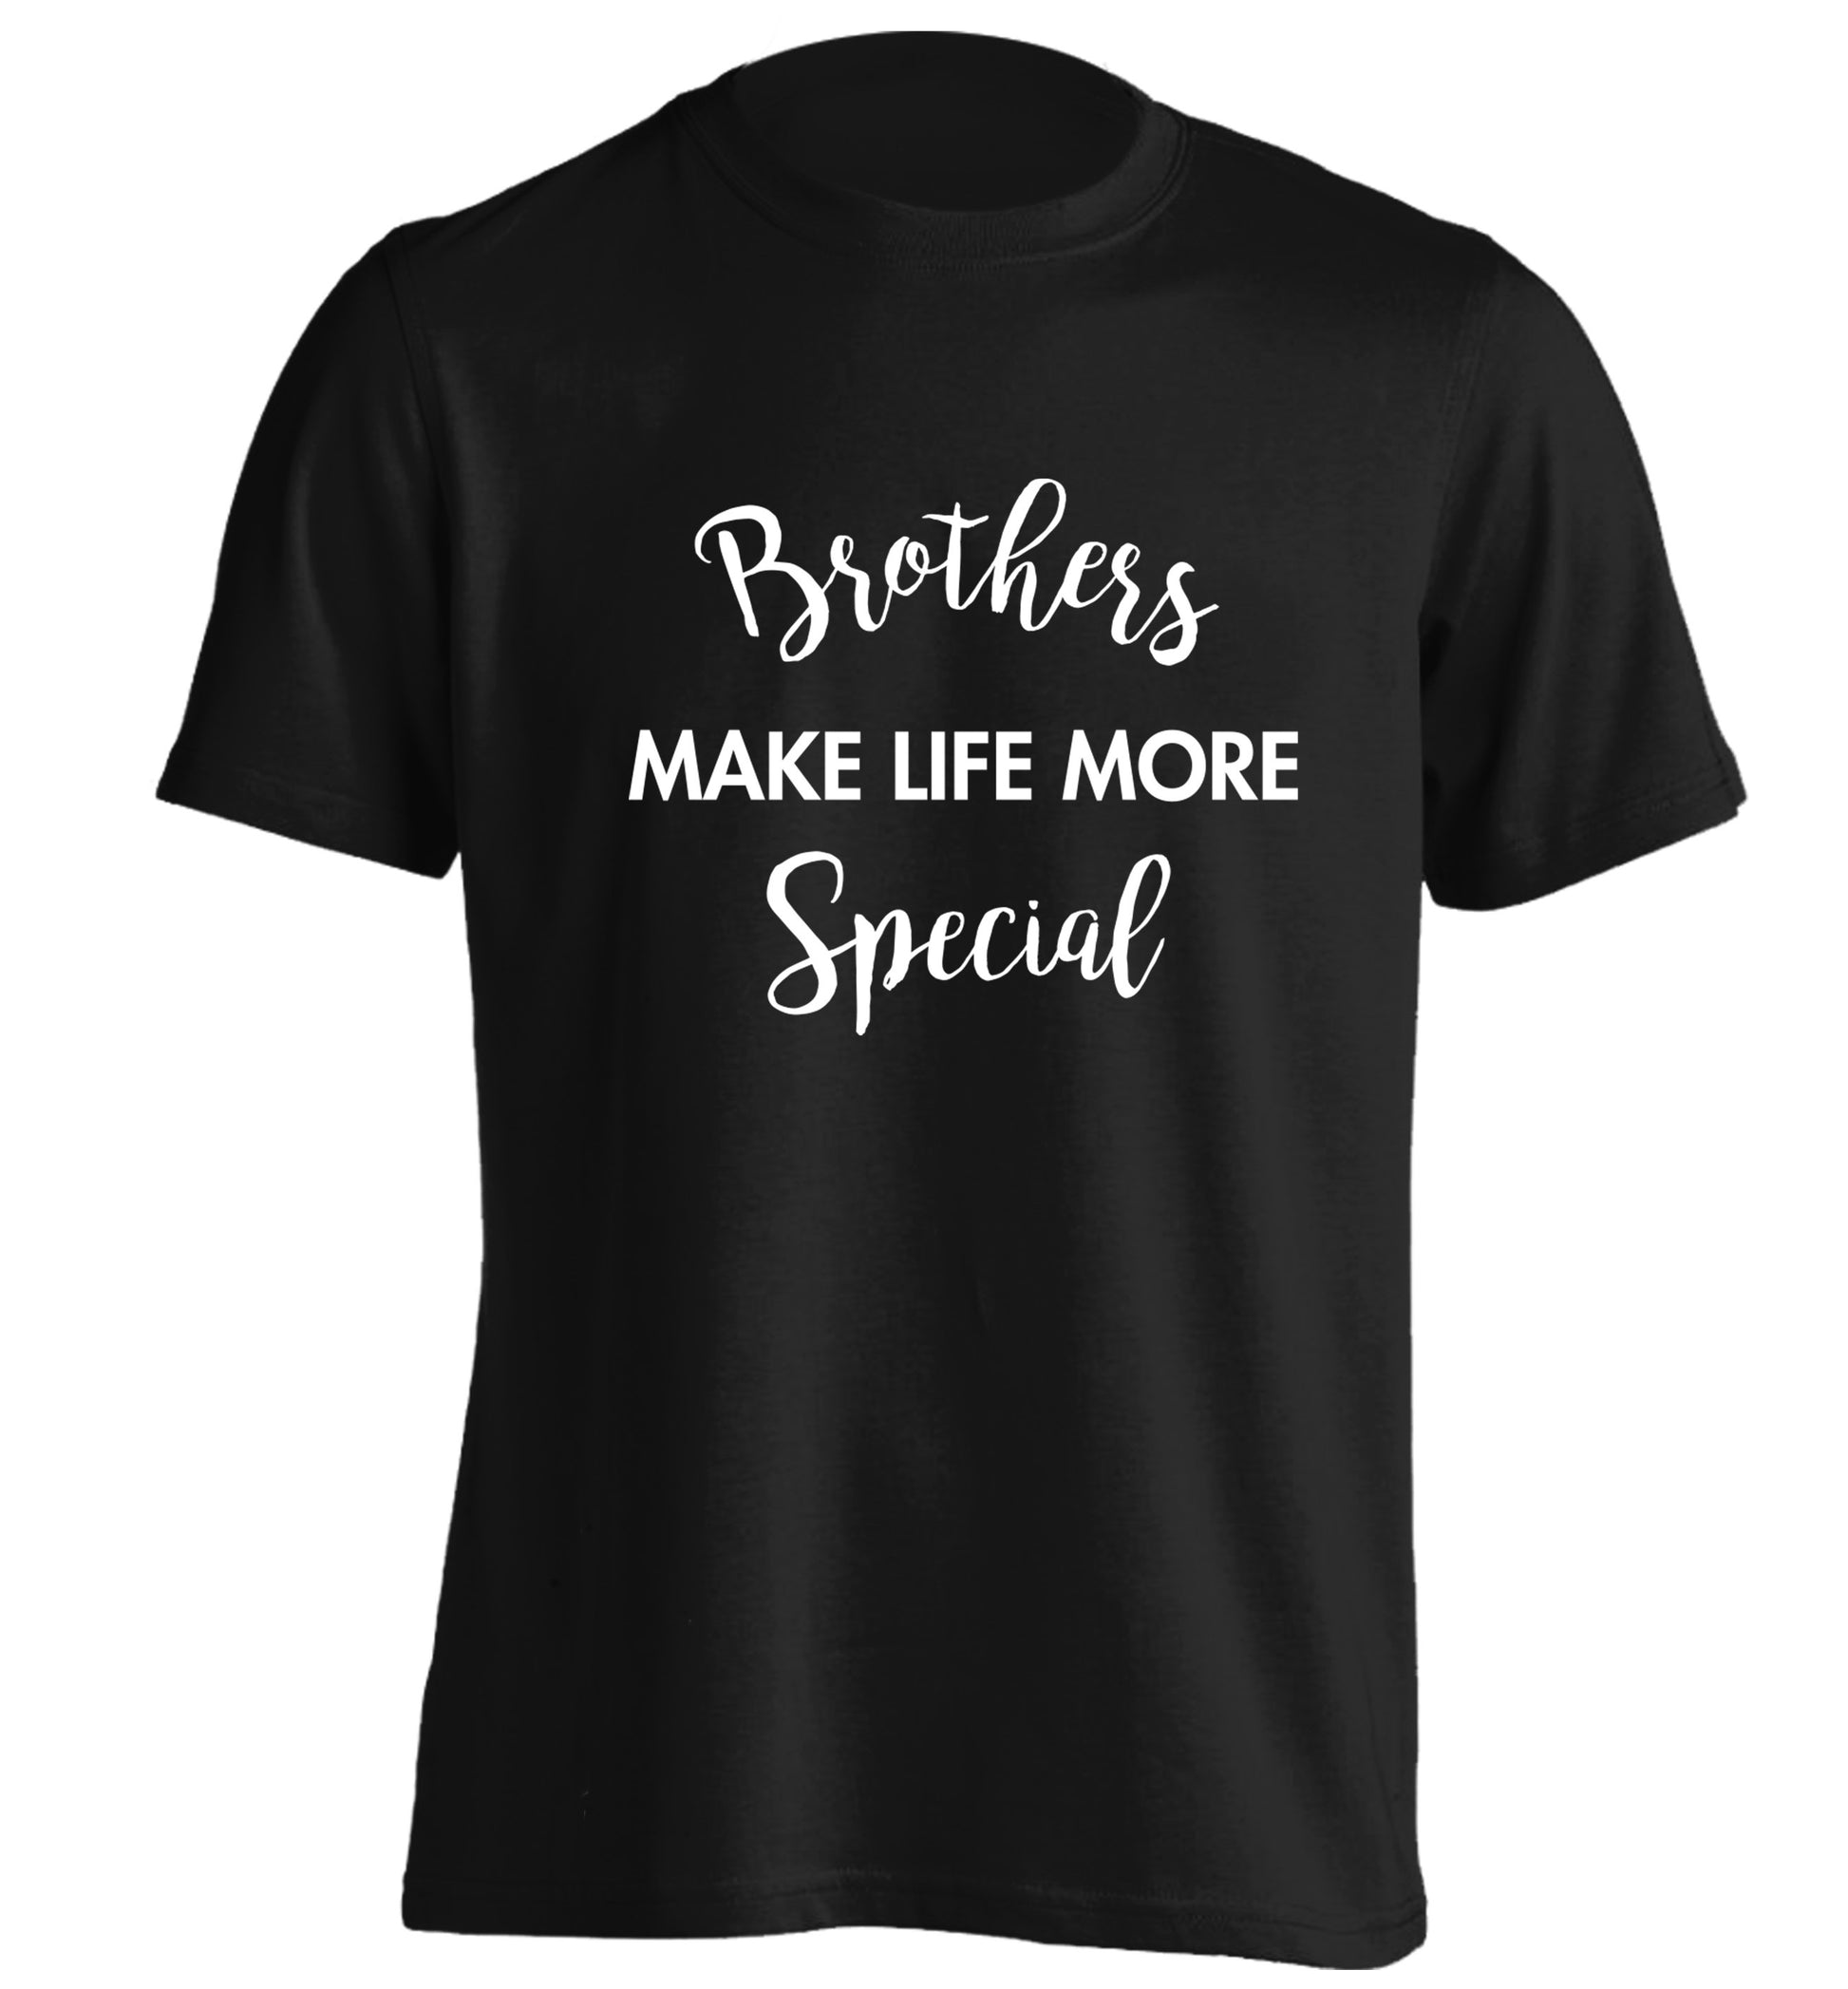 Brothers make life more special adults unisex black Tshirt 2XL